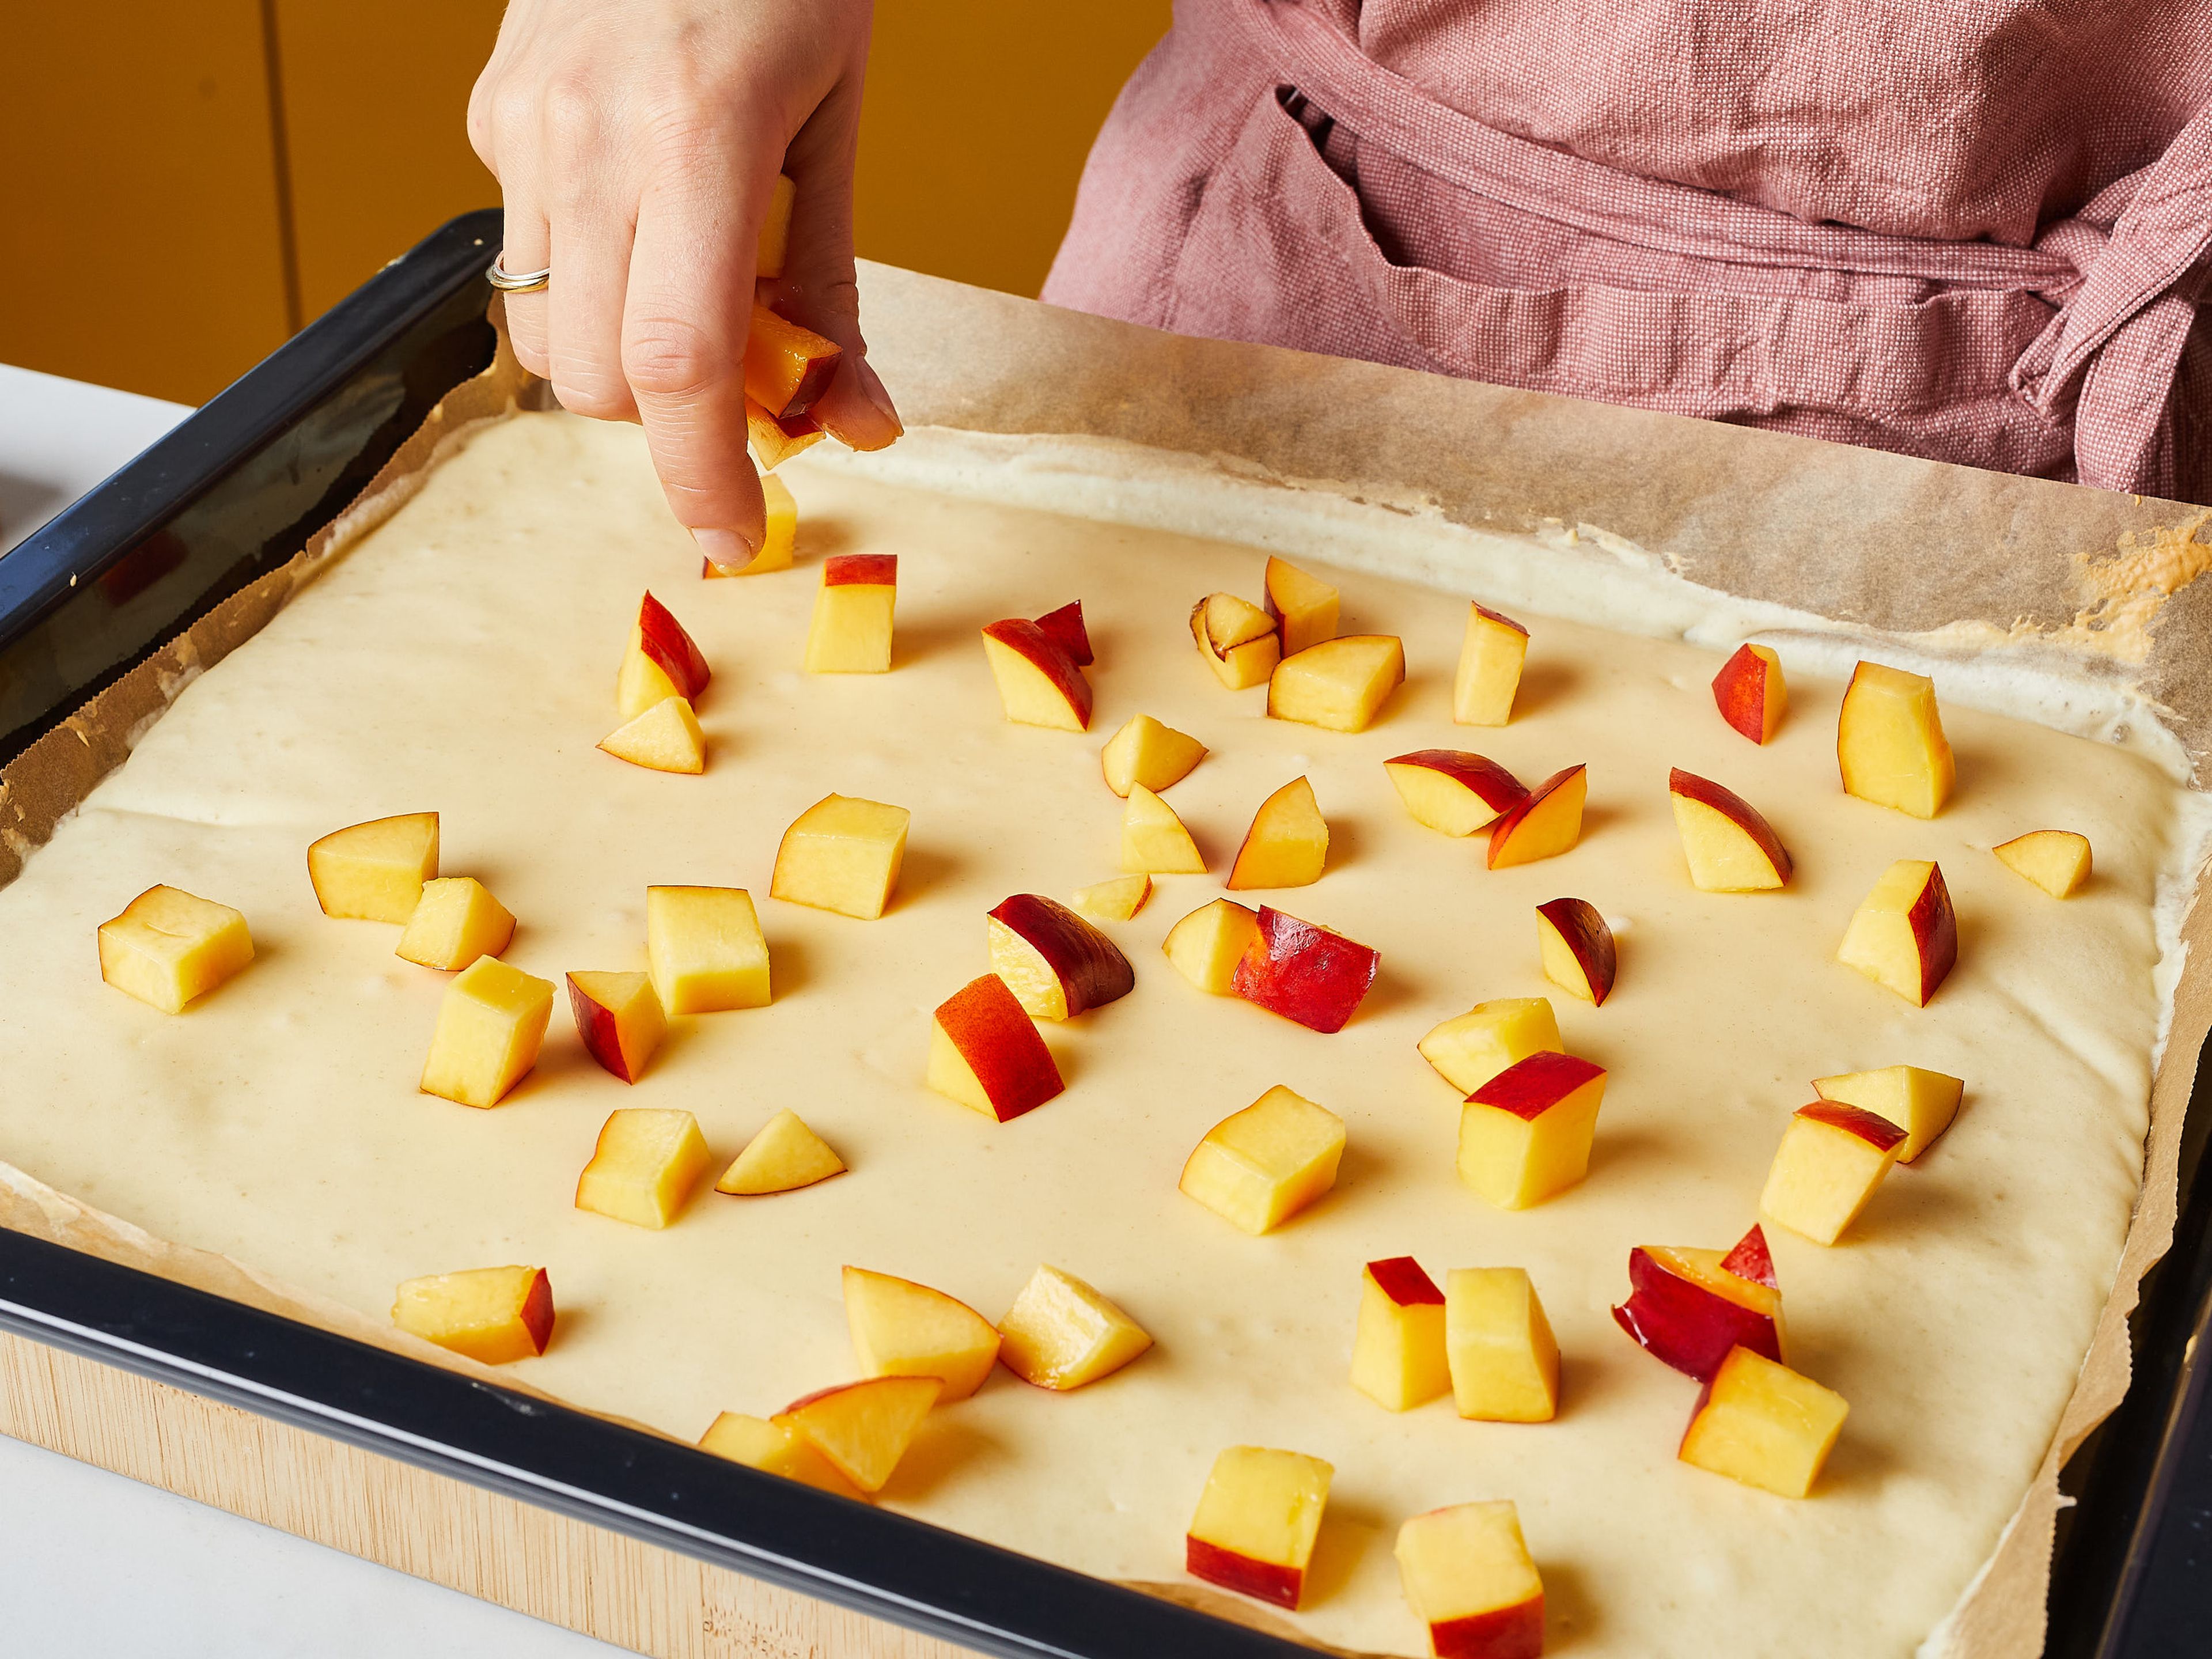 Spread the batter evenly with a spoon on a baking sheet lined with parchment paper. Bake the batter on the middle shelf for 5 minutes. Then remove from the oven, spread the nectarine cubes evenly on top, press in lightly, and bake for another 5 min.